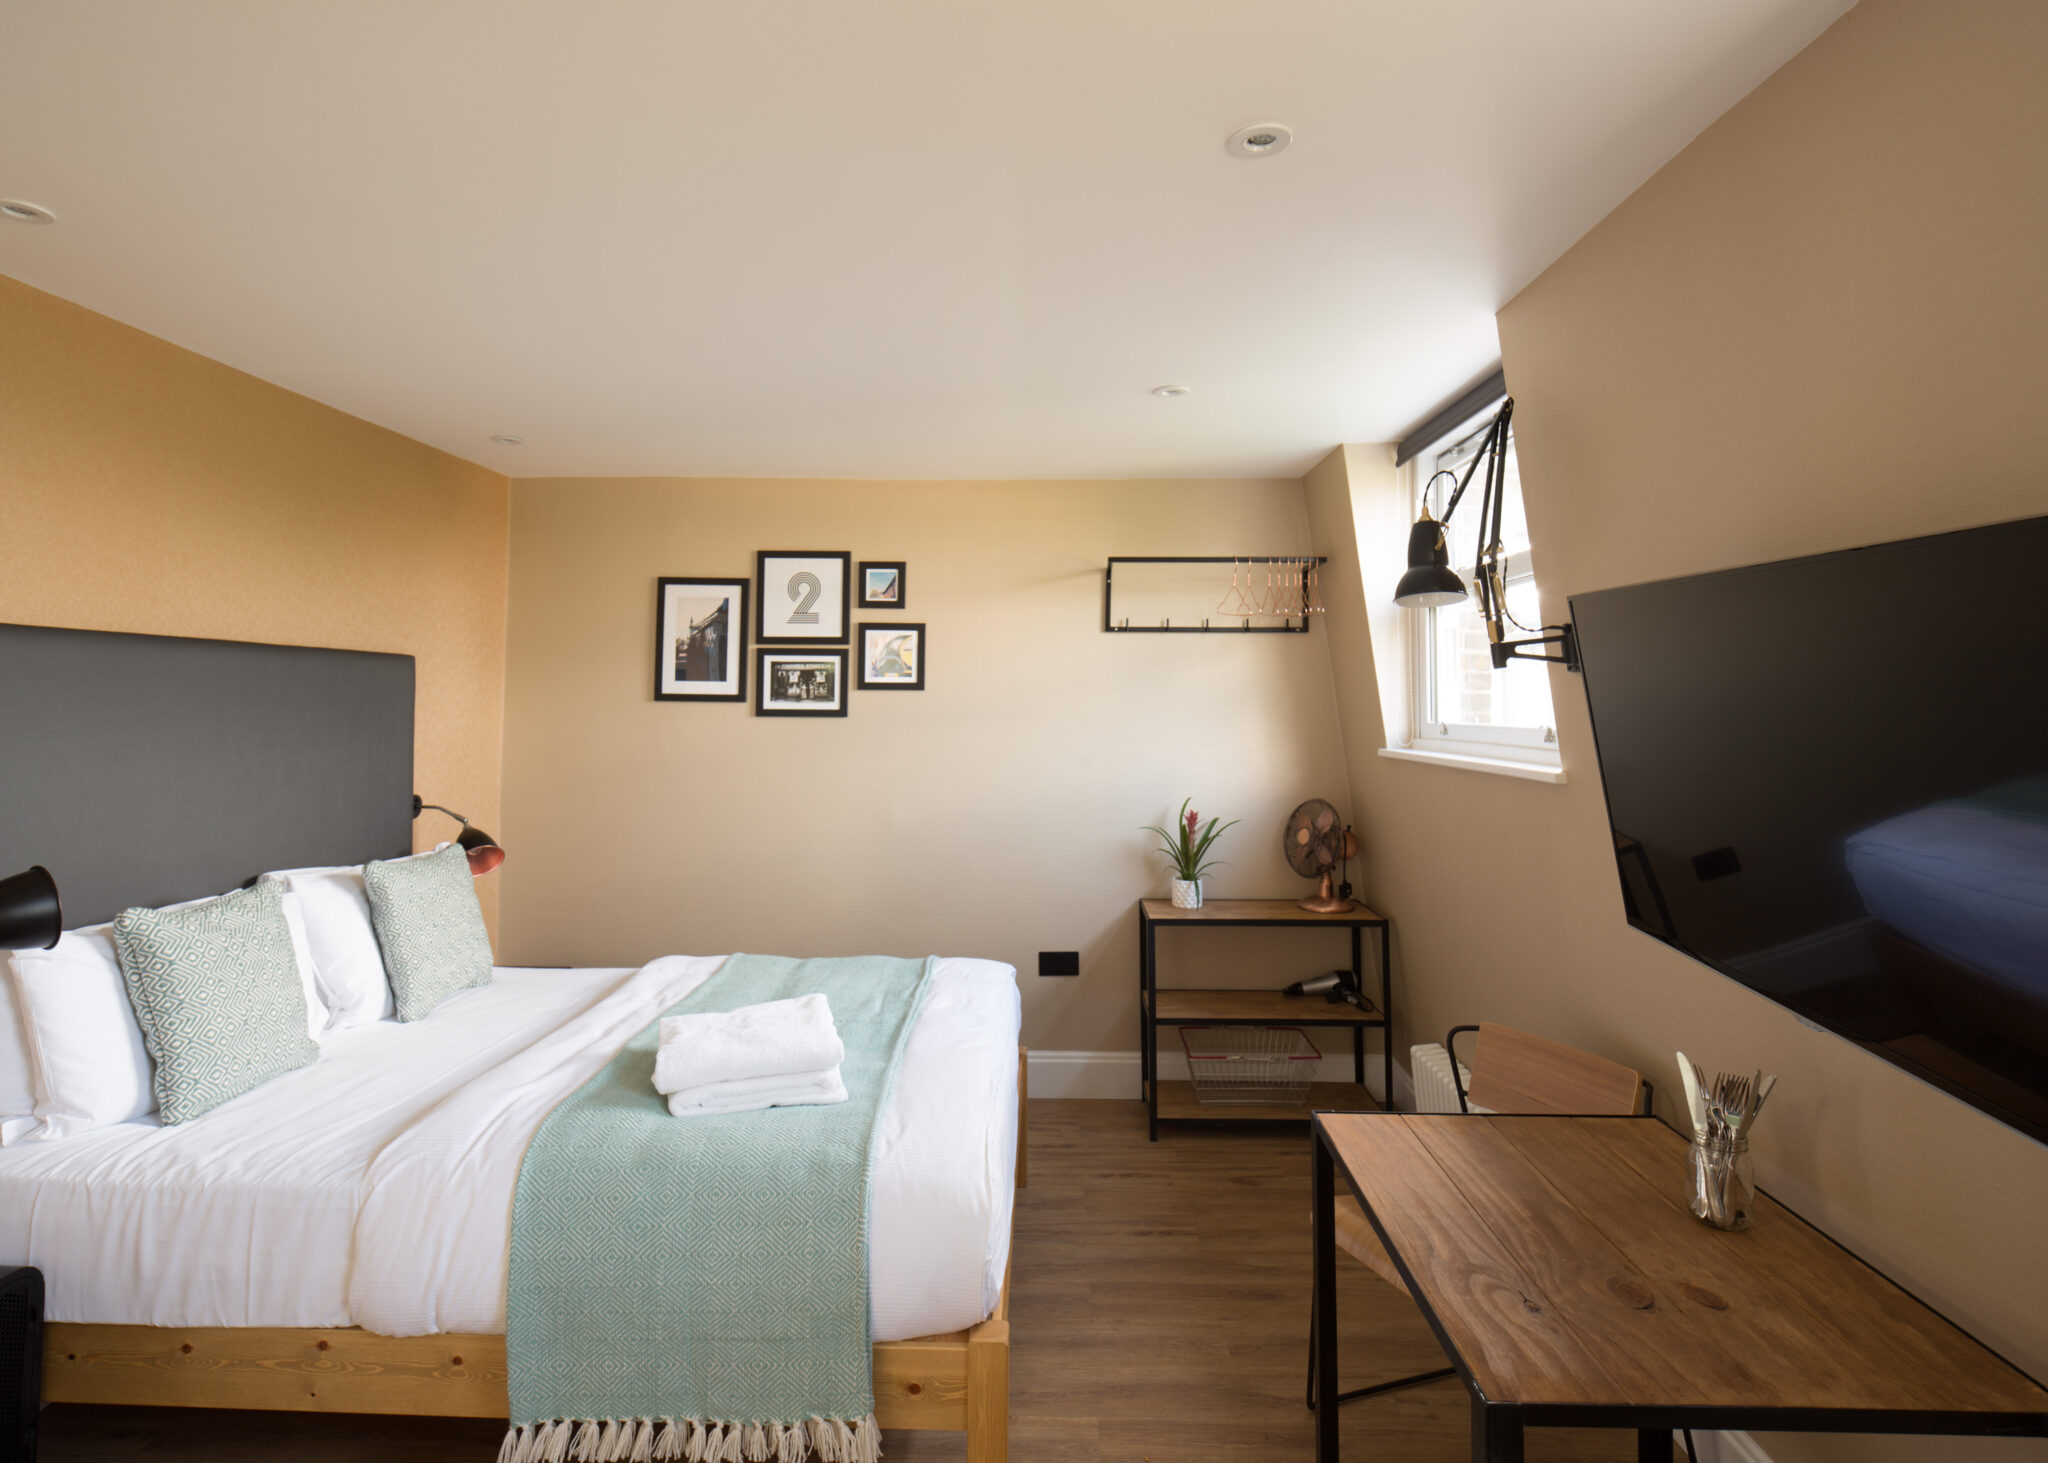 Enjoy-modern-comforts-at-our-Serviced-Accommodation-West-London.-Book-Room2-Hammersmith-Aparthotel-for-short-stays-and-corporate-relocation.